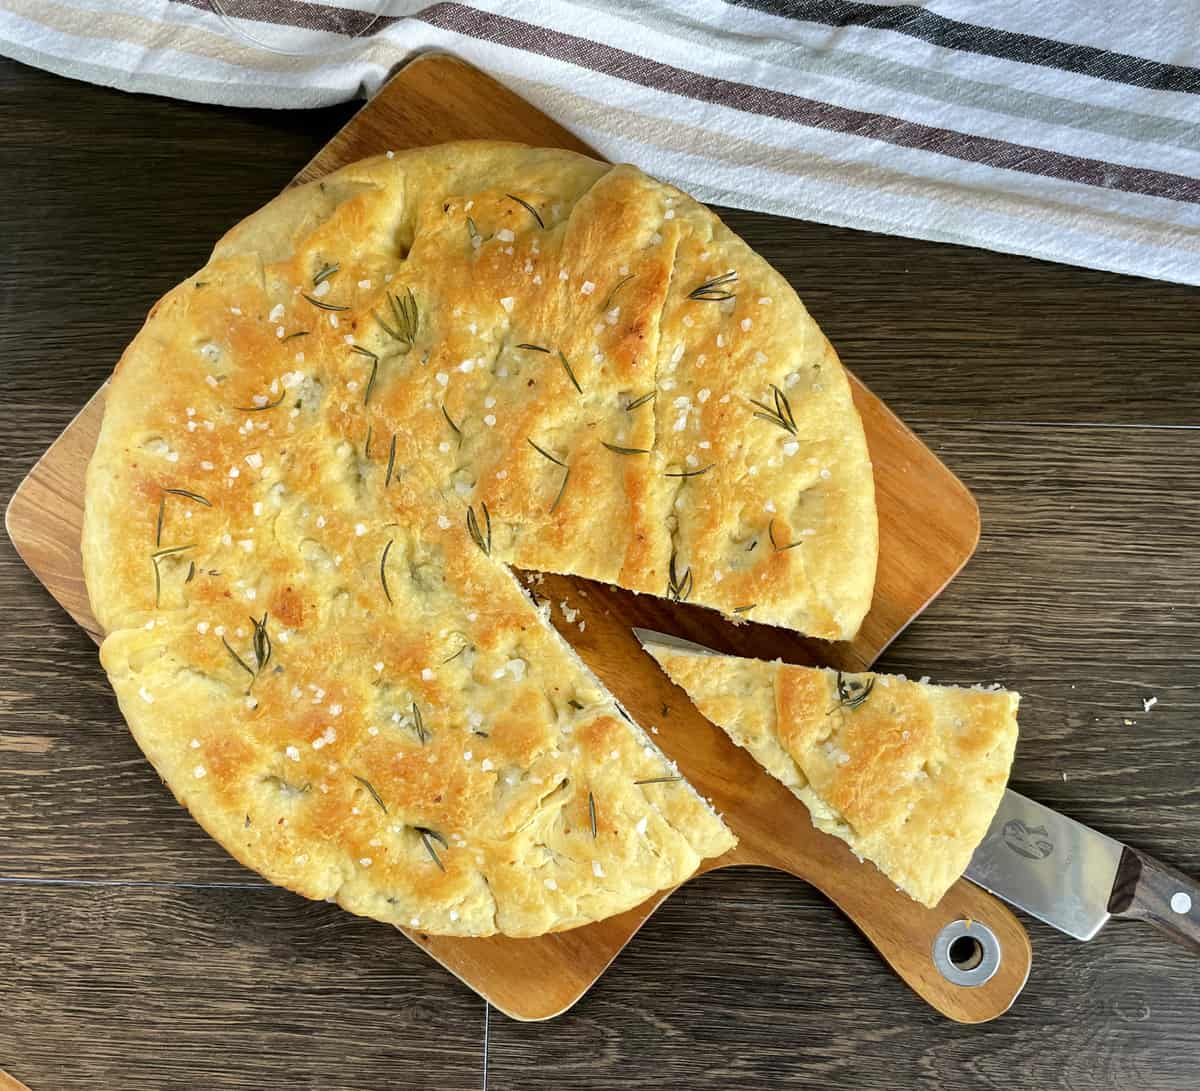 Overhead shot of golden brown focaccia with sea salt and rosemary with a triangle slice cut out